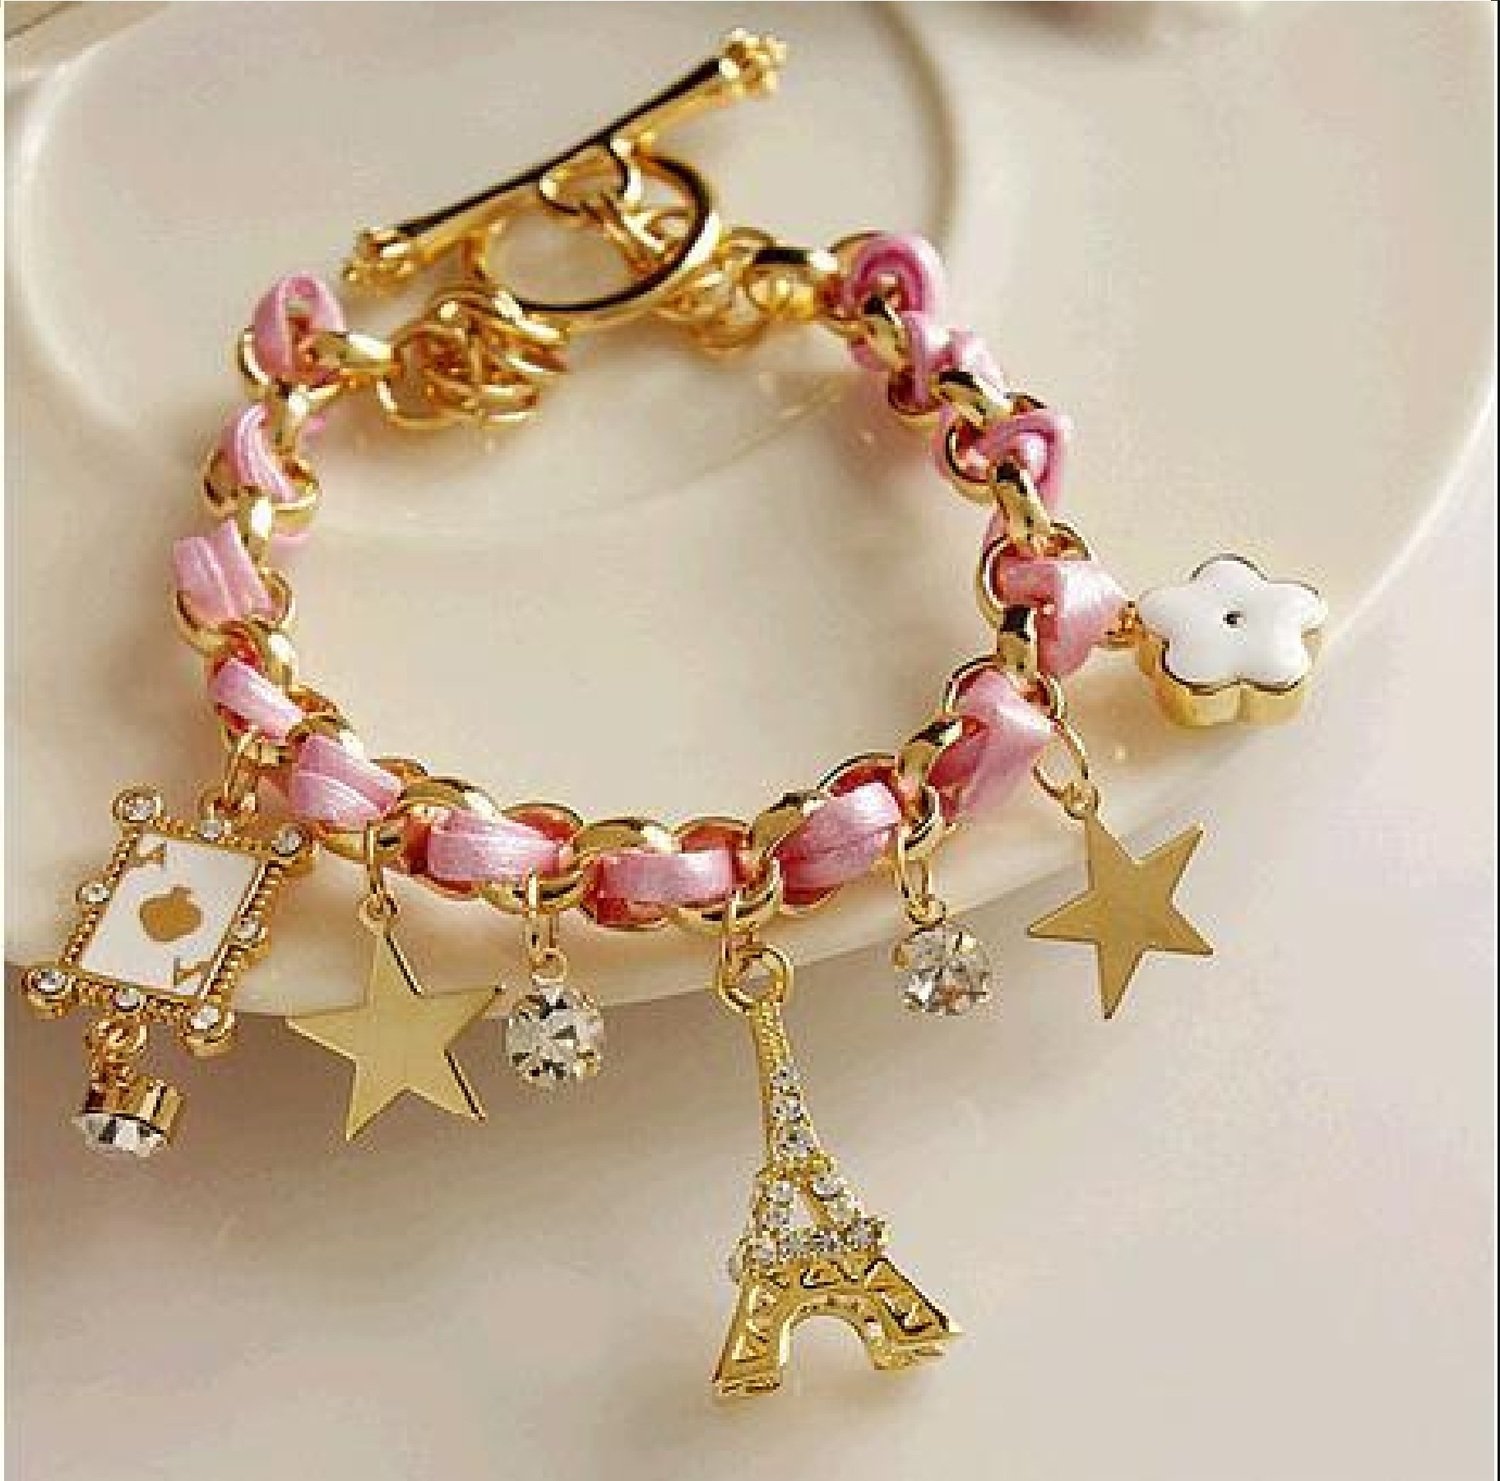 Hand-woven fashion five-pointed star flower poker A Paris Eiffel Tower crown leather rope braided bracelet*